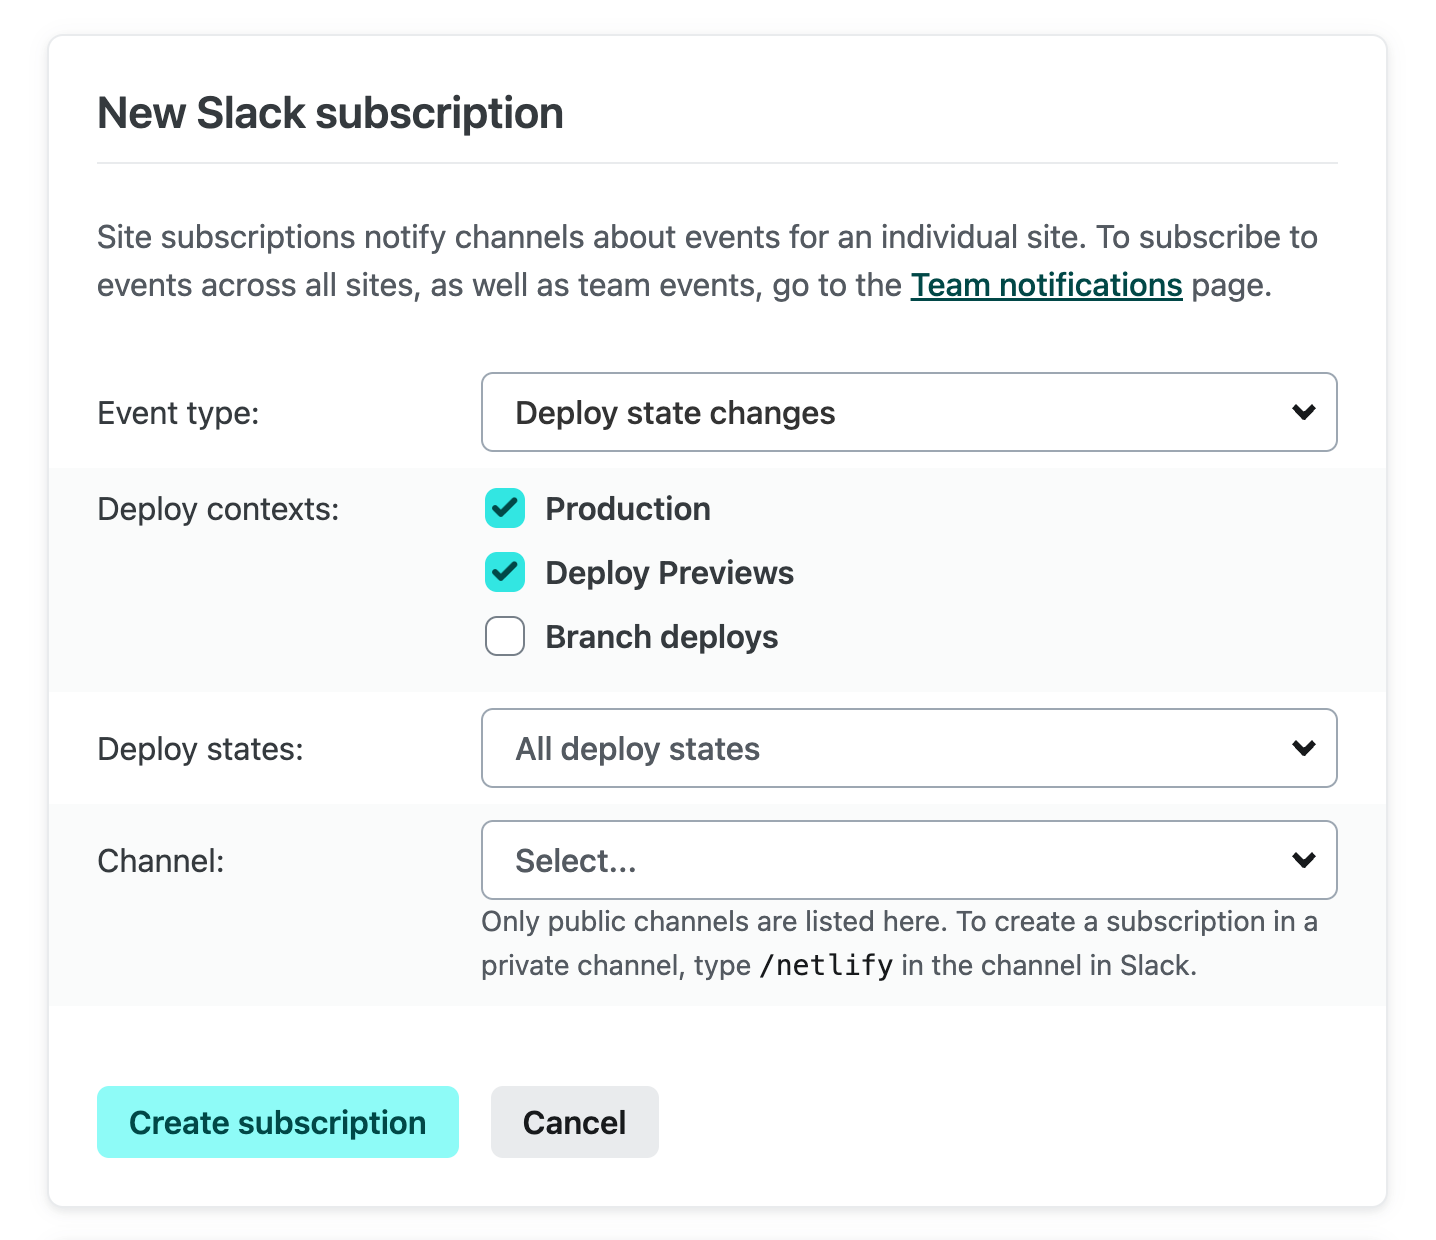 Slack subscription form in Netlify with the deploy state event selected, and with the production and deploy preview contexts selected